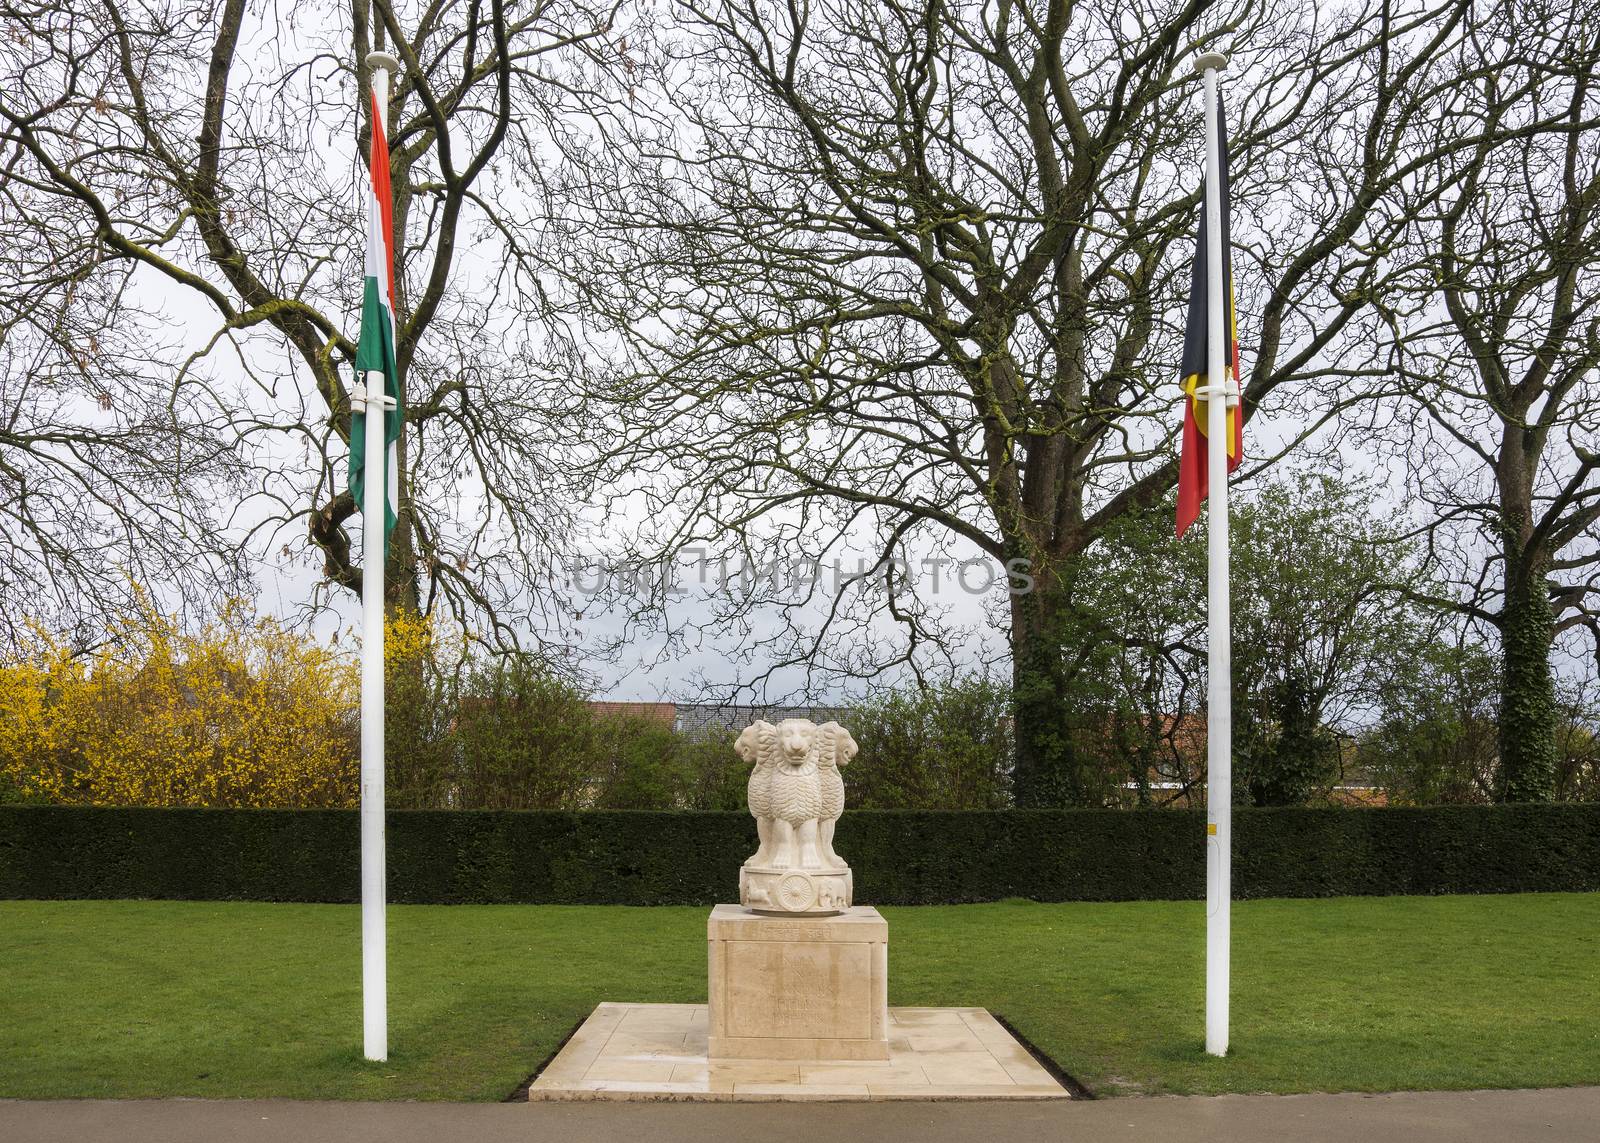 India in Flanders Fields Monument stands near the Menin Gate in Ypres, Ieper, Belgium.